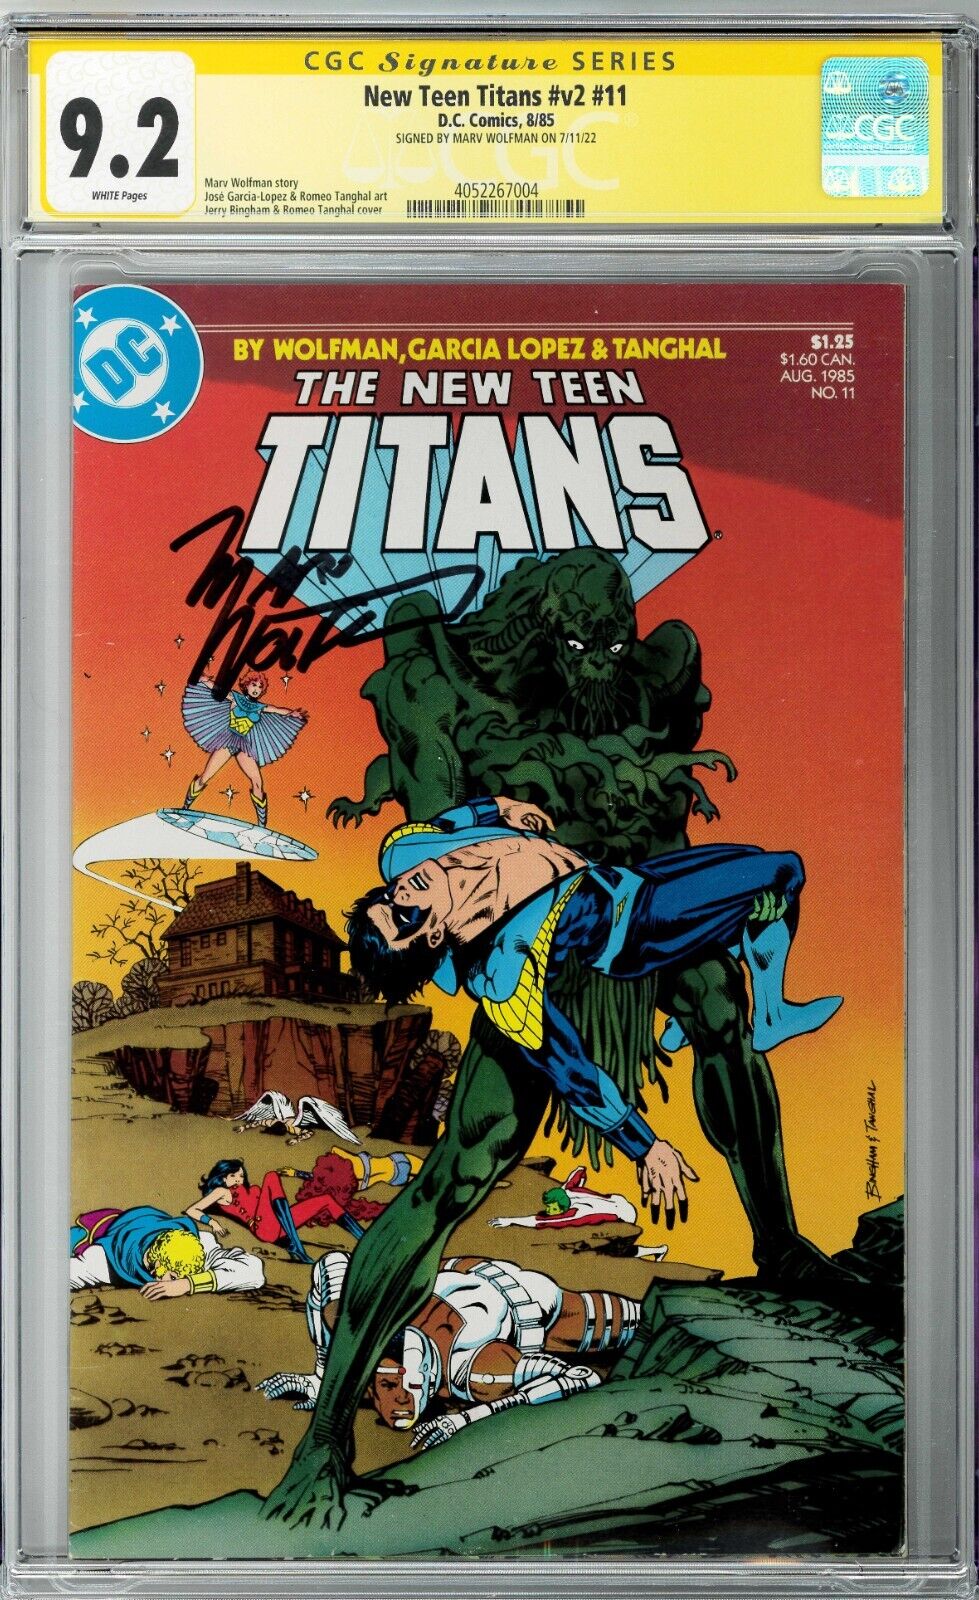 New Teen Titans v2 #11 CGC SS 9.2 (Aug 1985, DC) Signed by Marv Wolfman